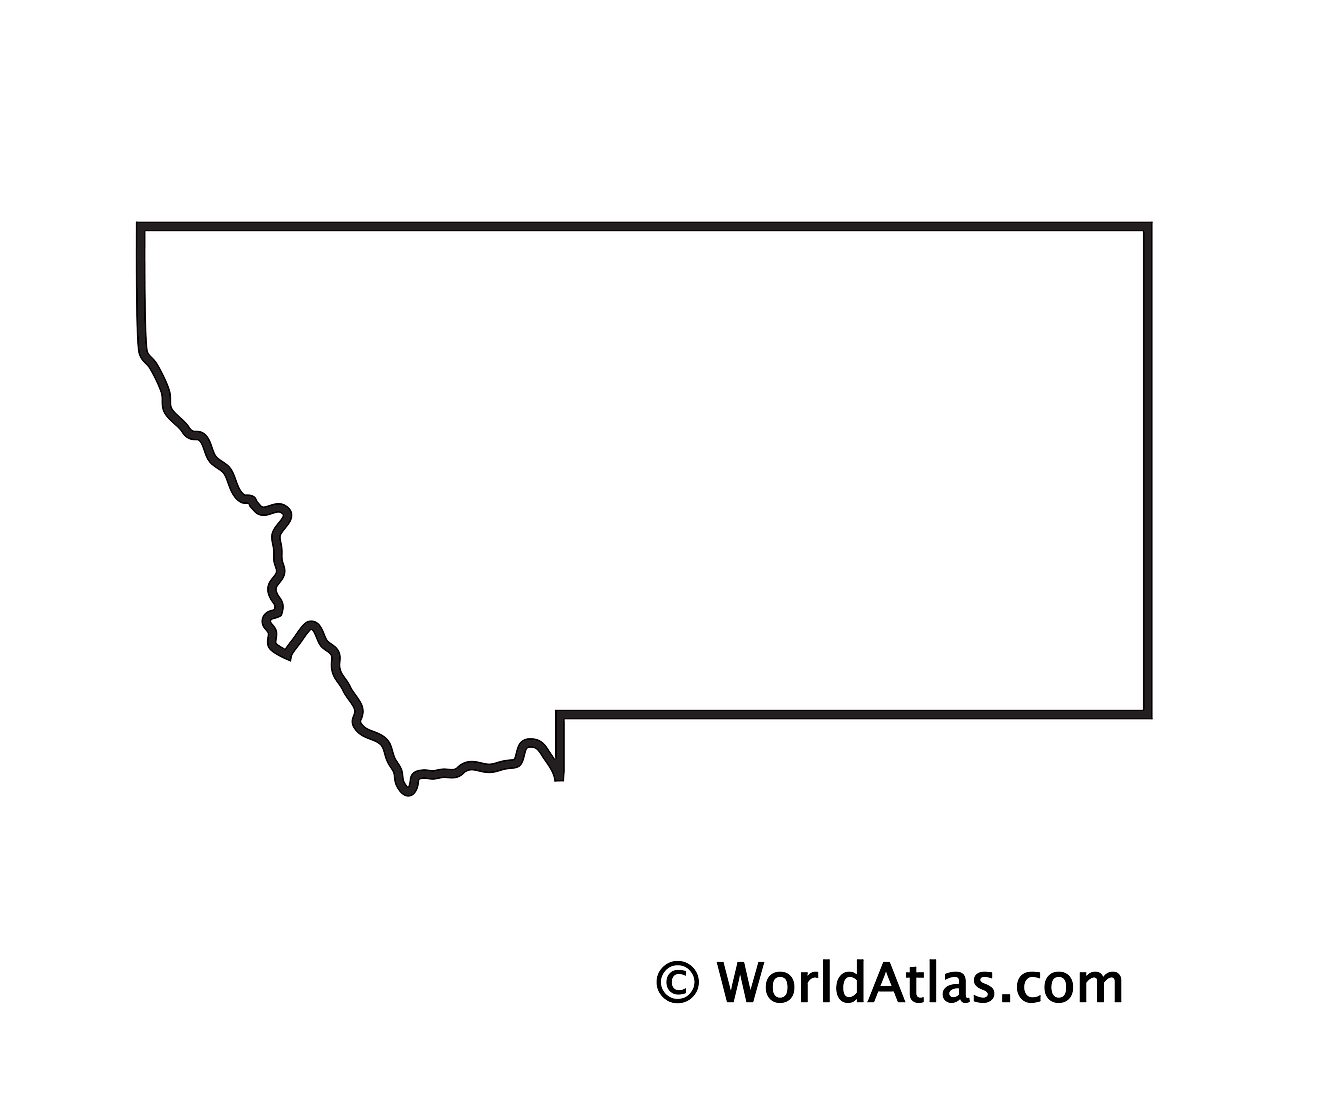 Blank Outline Map of Montana